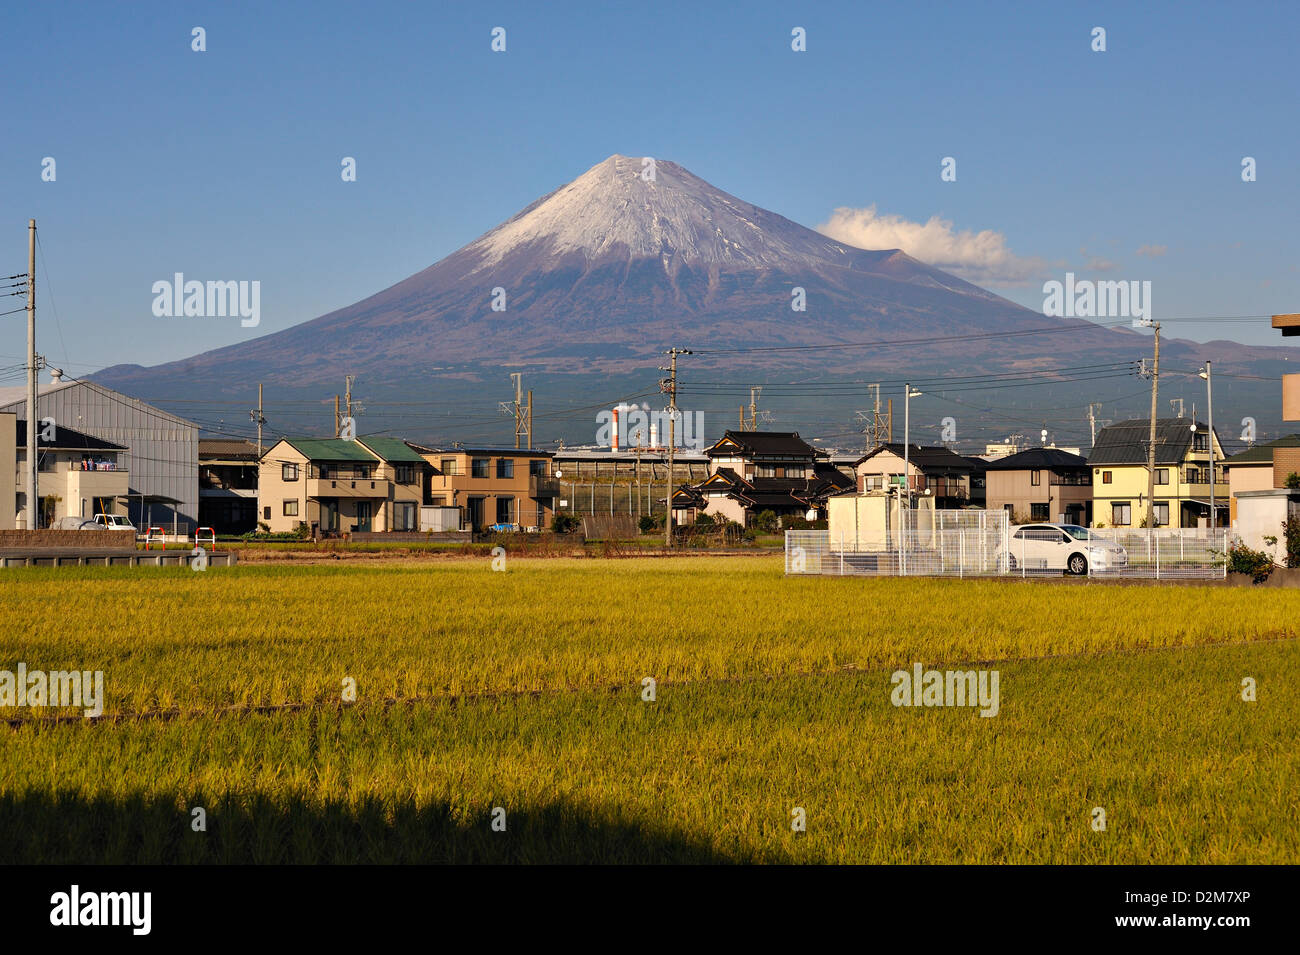 Mount Fuji seen from the suburbs of Fuji City, with rice fields and homes. Stock Photo